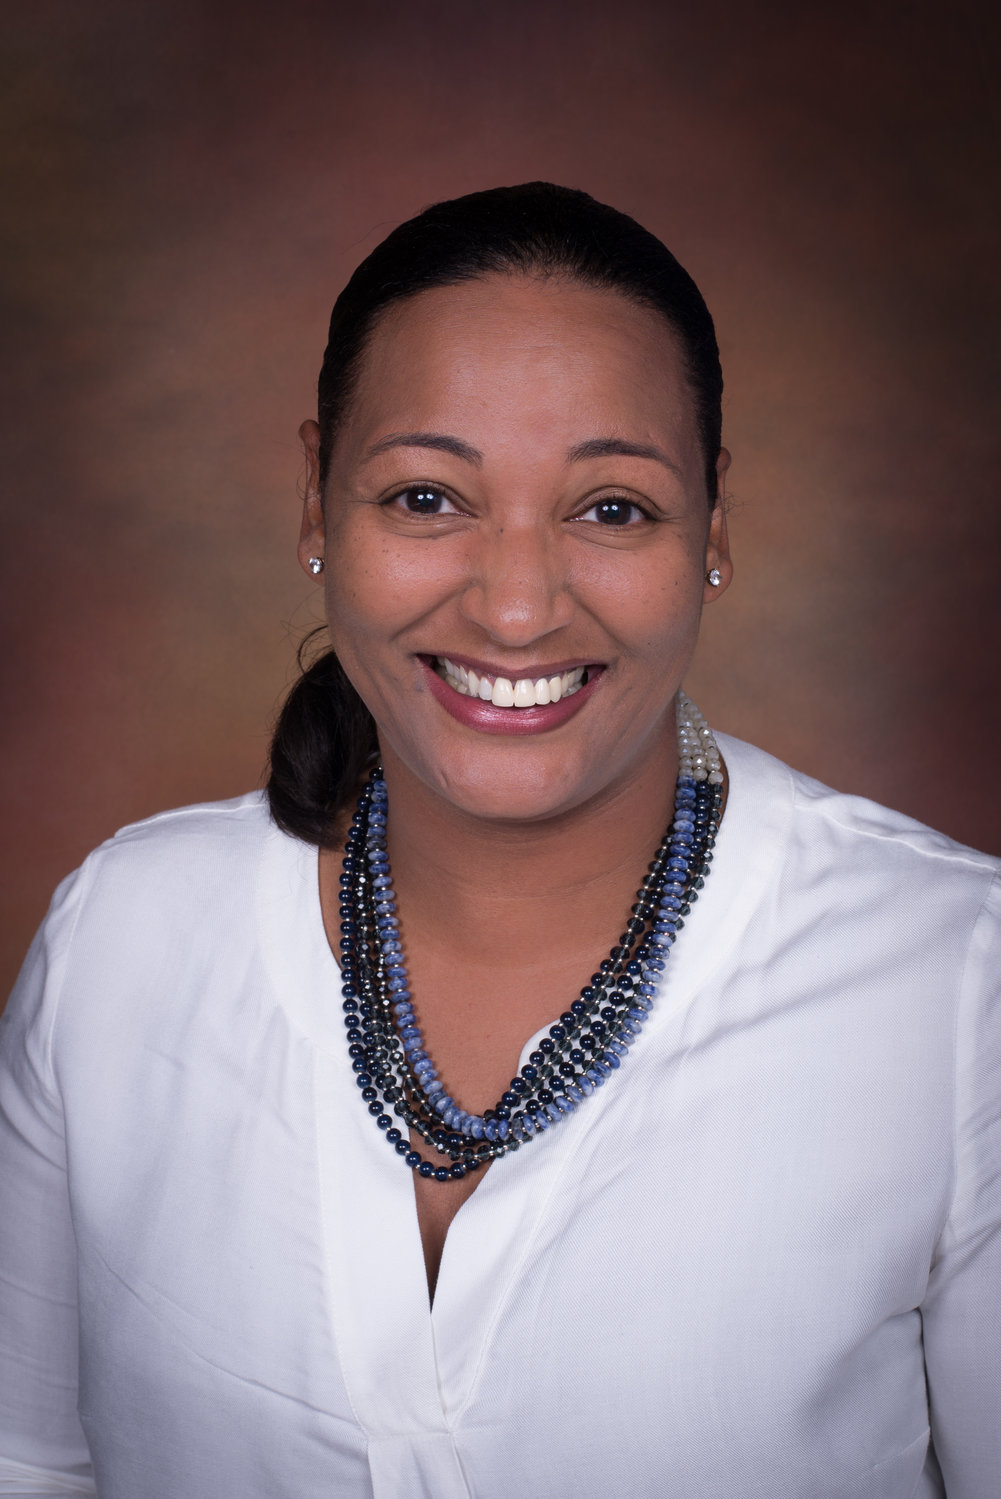 Tiffany Capers is running for the seat vacated by Karen Taylor Bass.